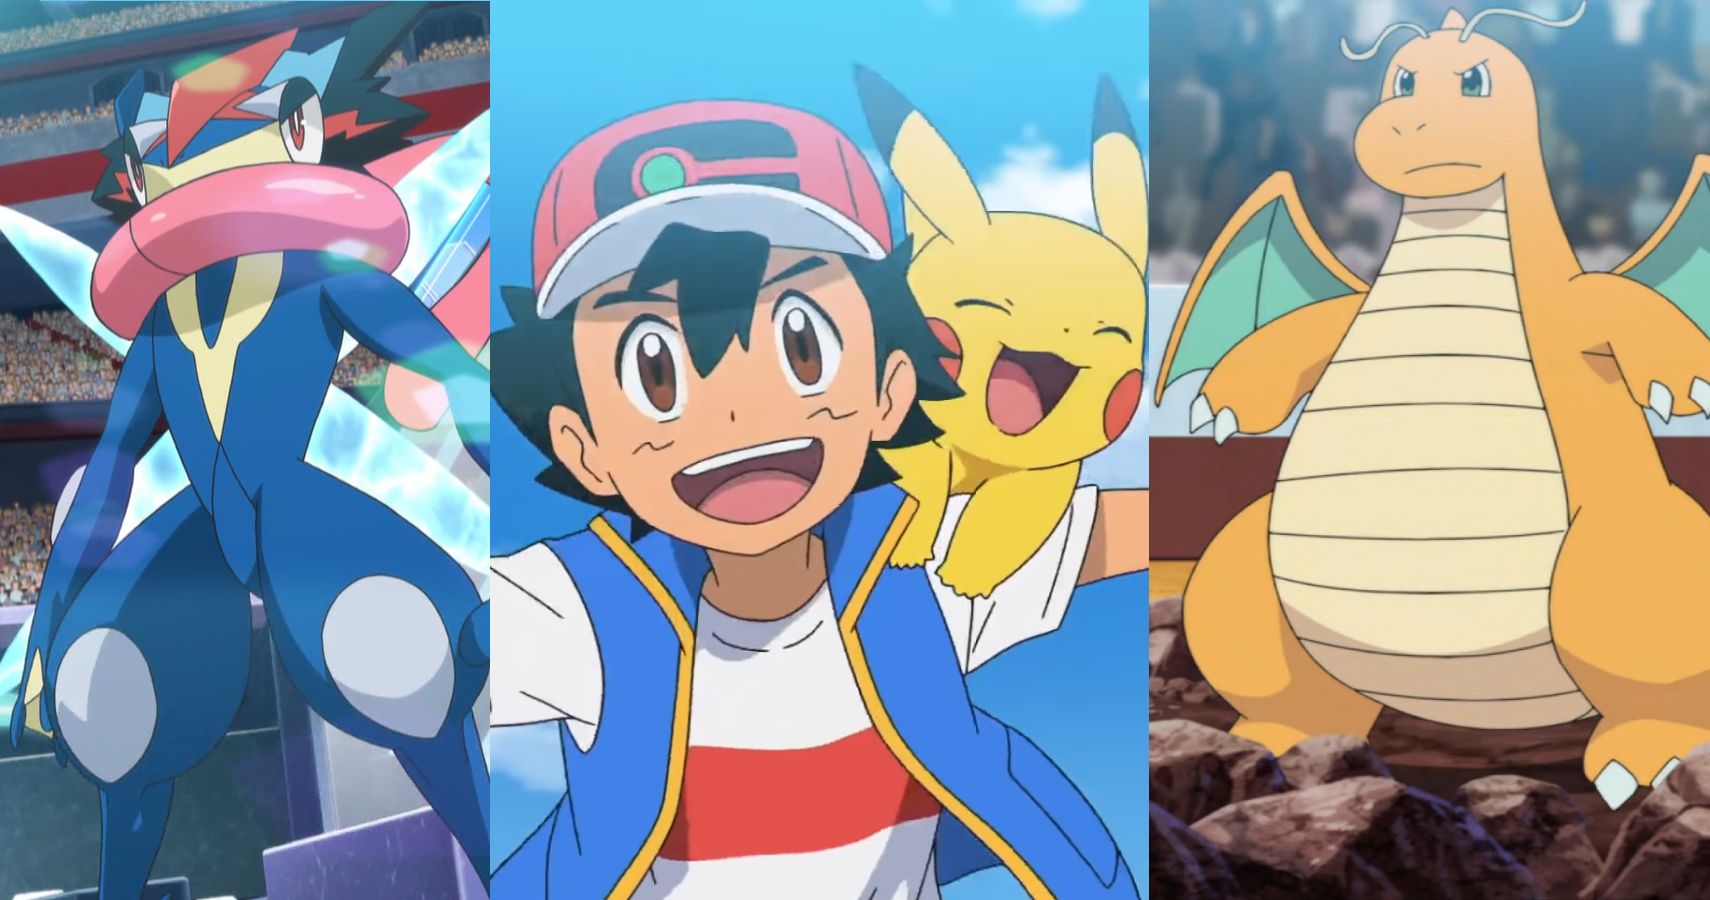 Who Is Ash's Strongest Pokémon? (& 9 More Of His Best Teammates Ranked)